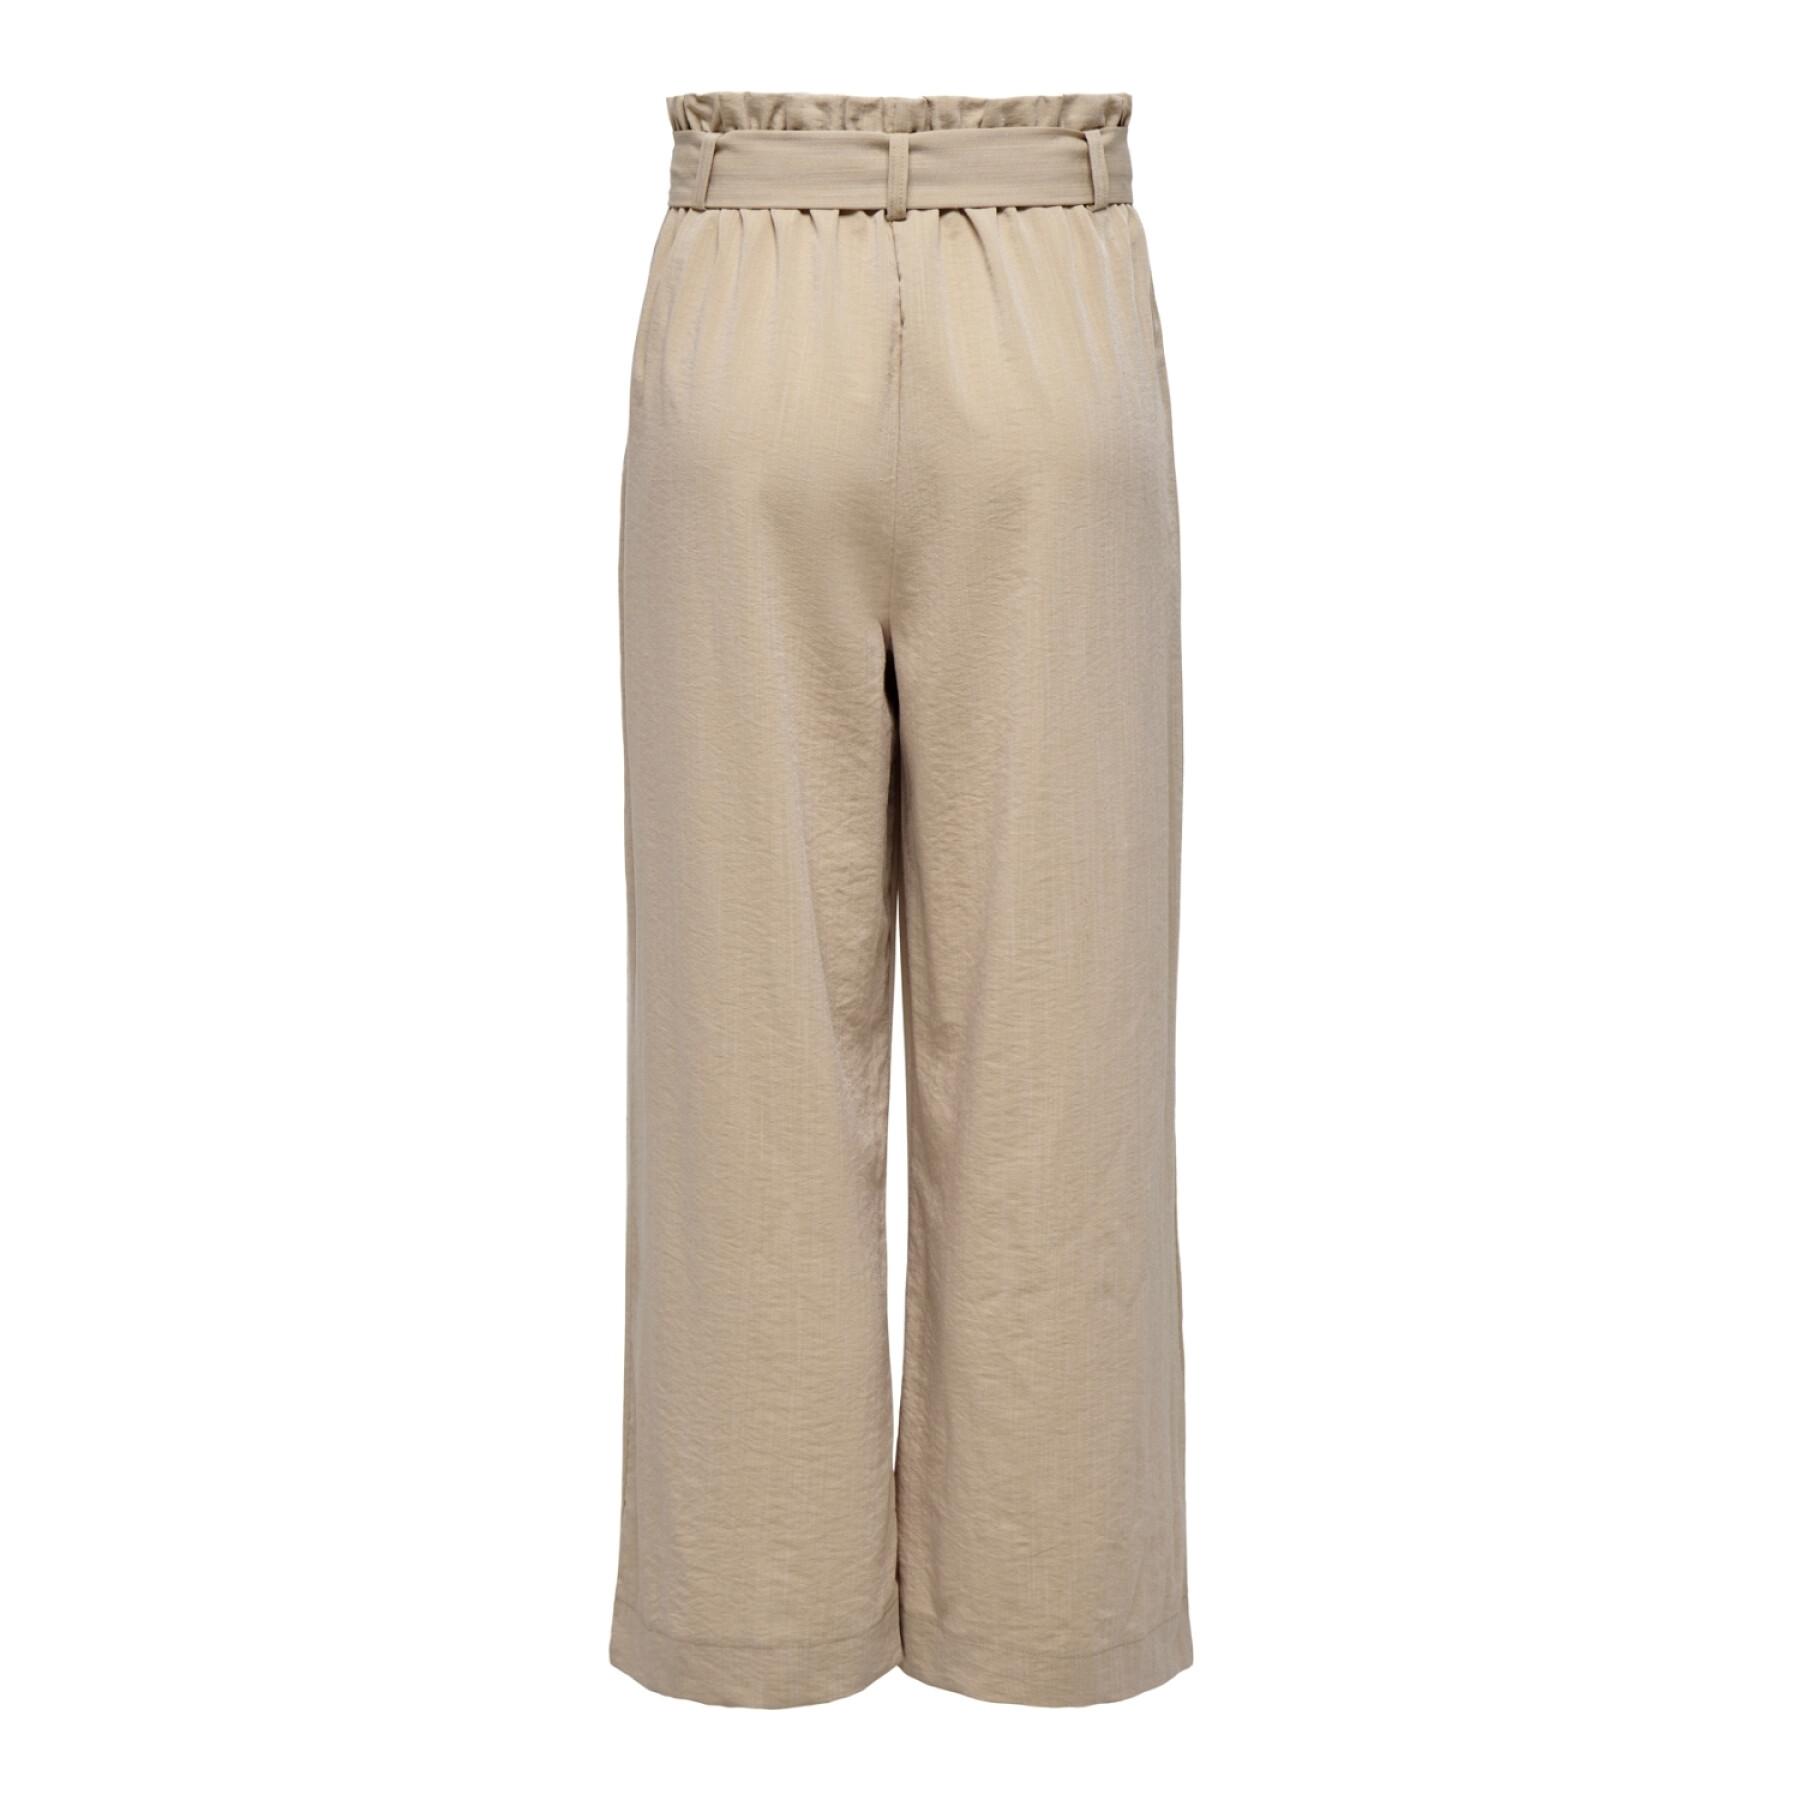 Women's pants Only Marsa Solid